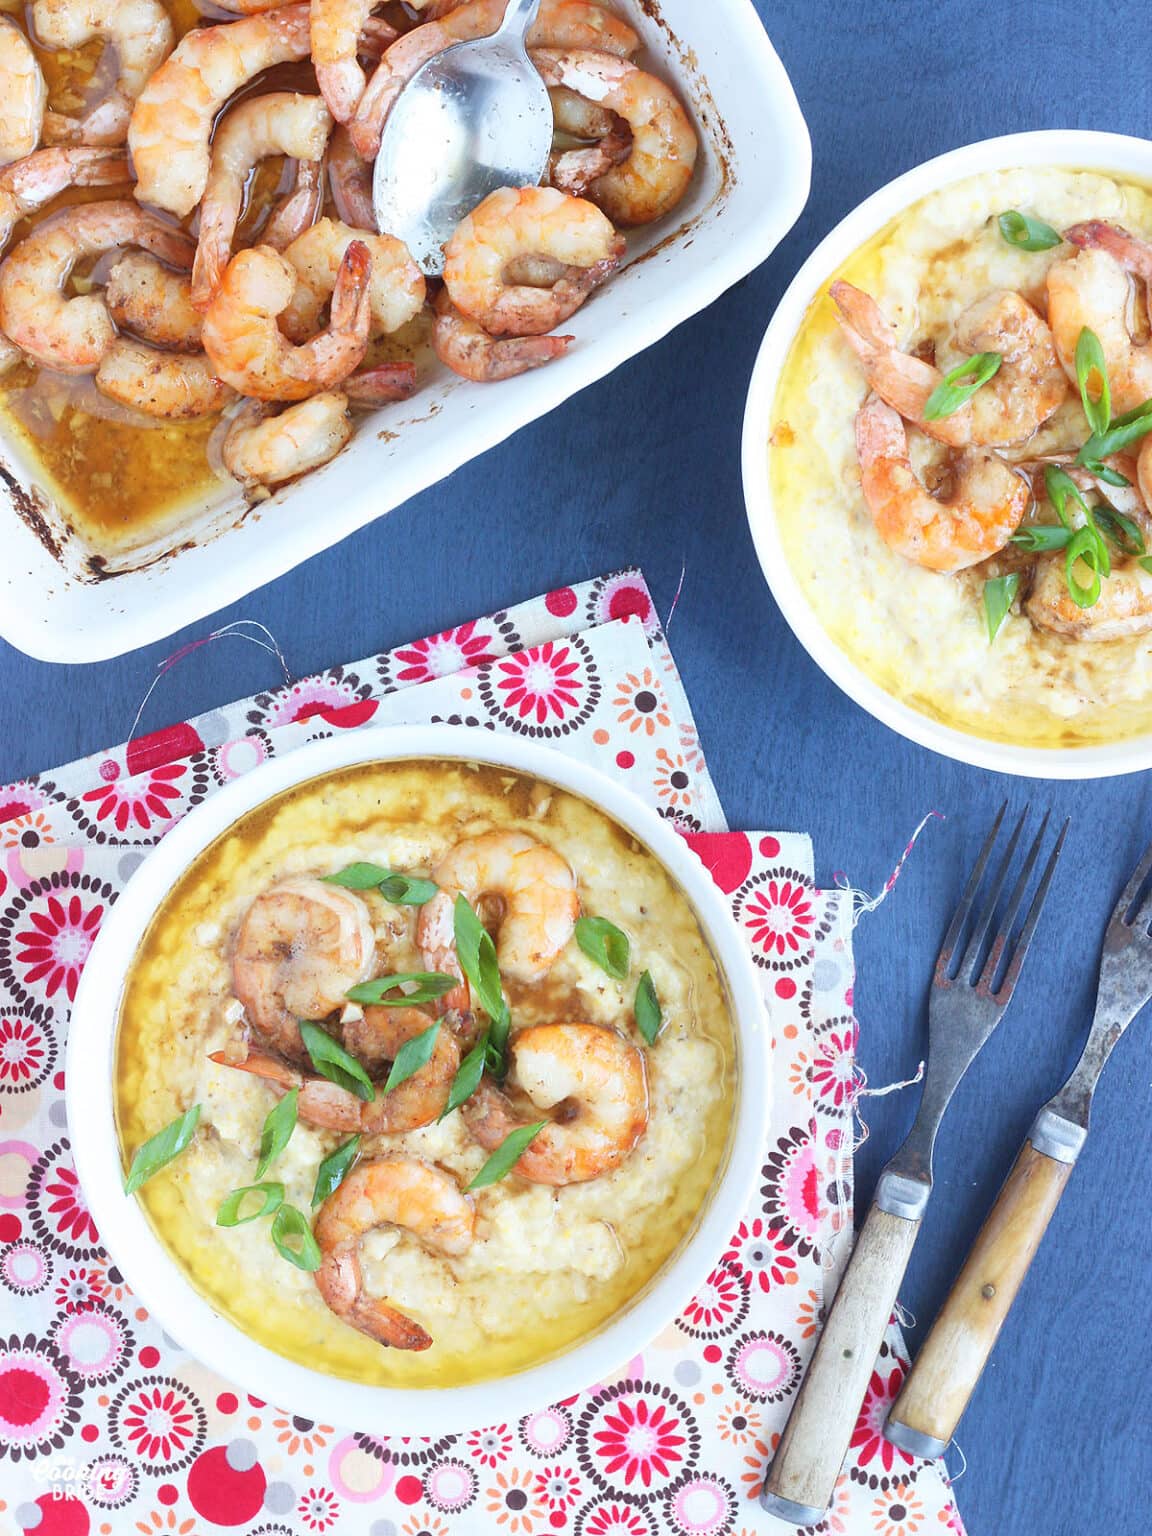 Barbecue Shrimp and Grits + VIDEO - The Cooking Bride